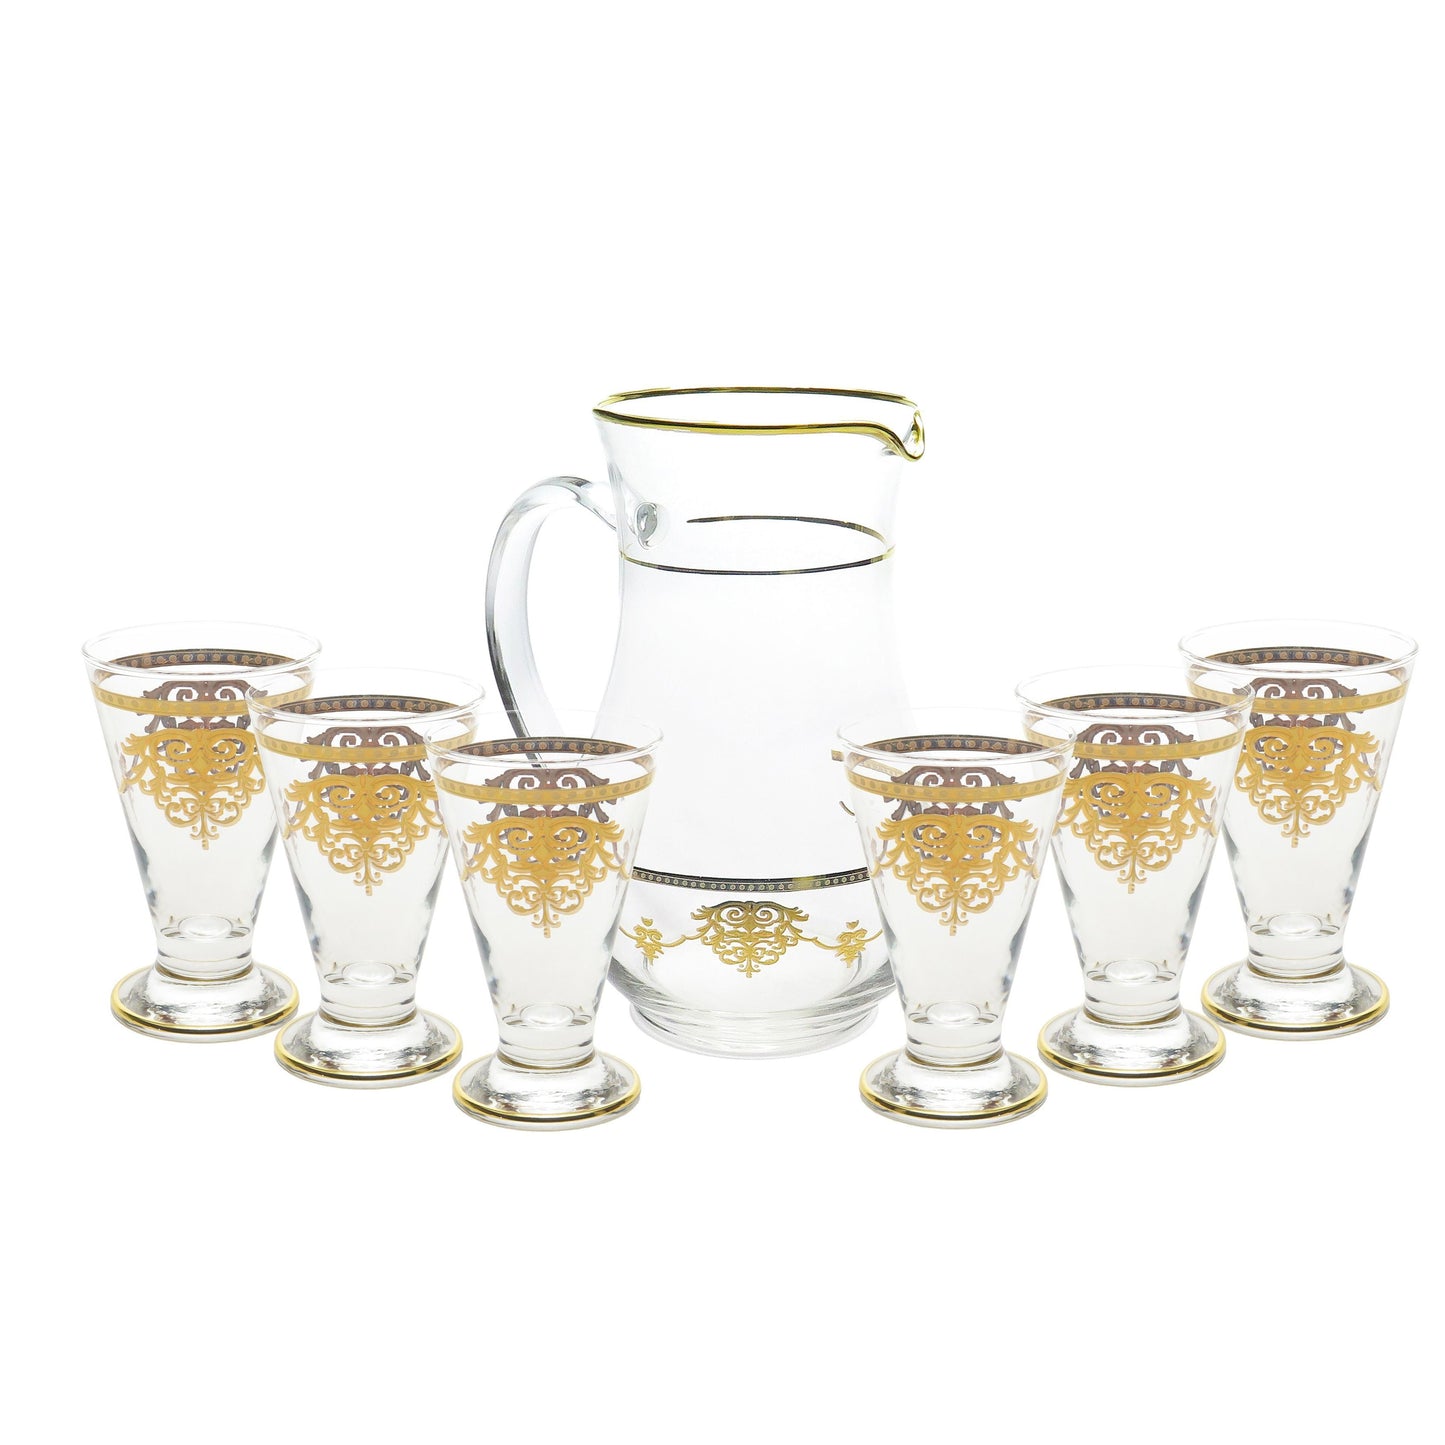 Classic Touch Decor 7 Piece Drinkware Set With Gold Artwork, 8"